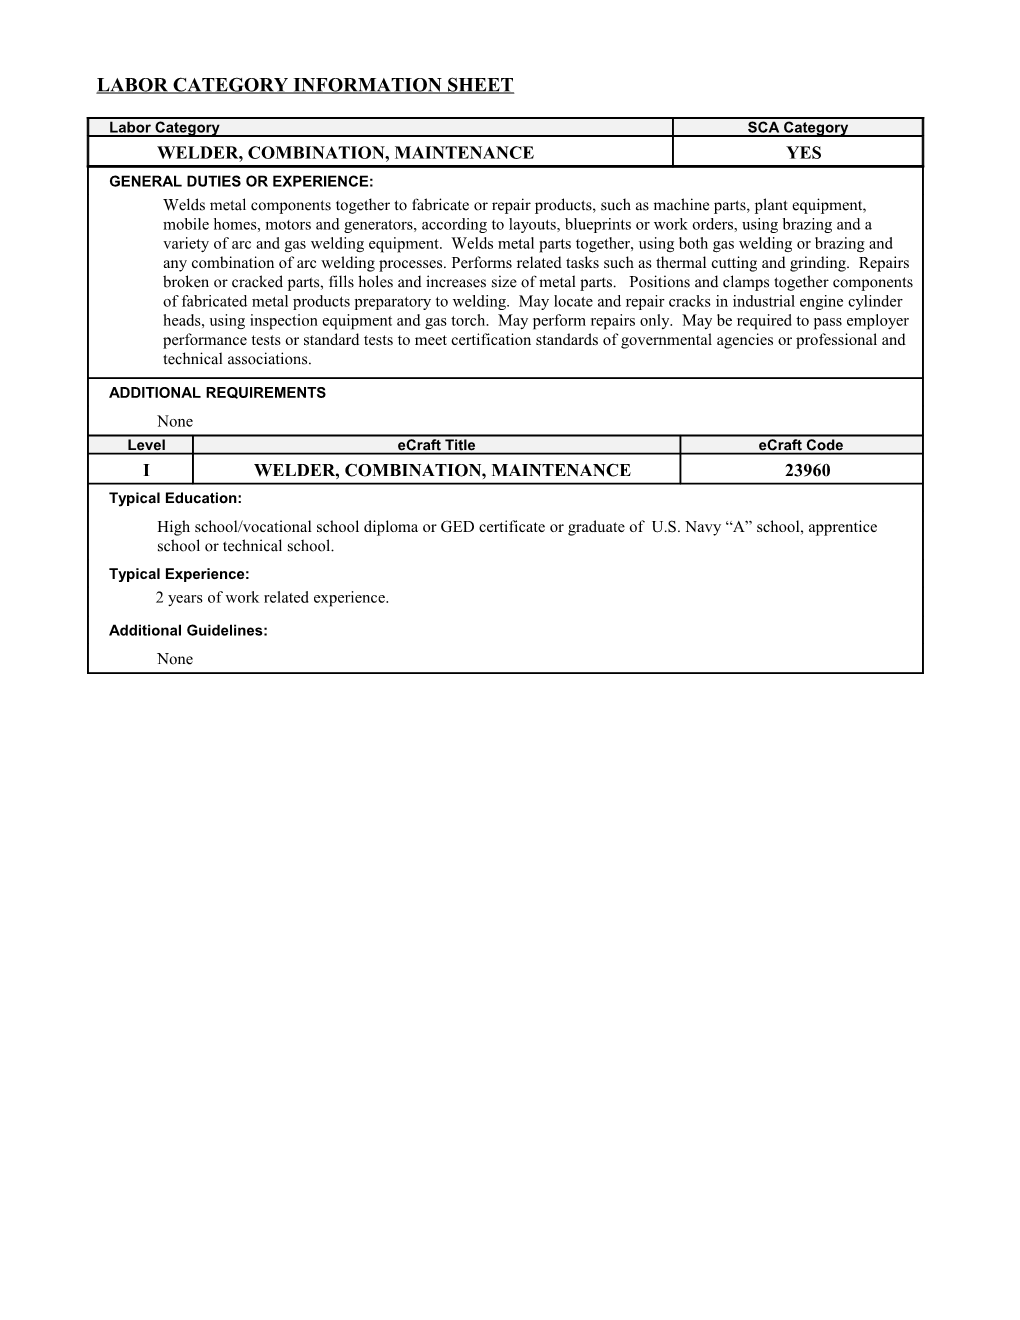 Personnel Qualifications Sheet s1